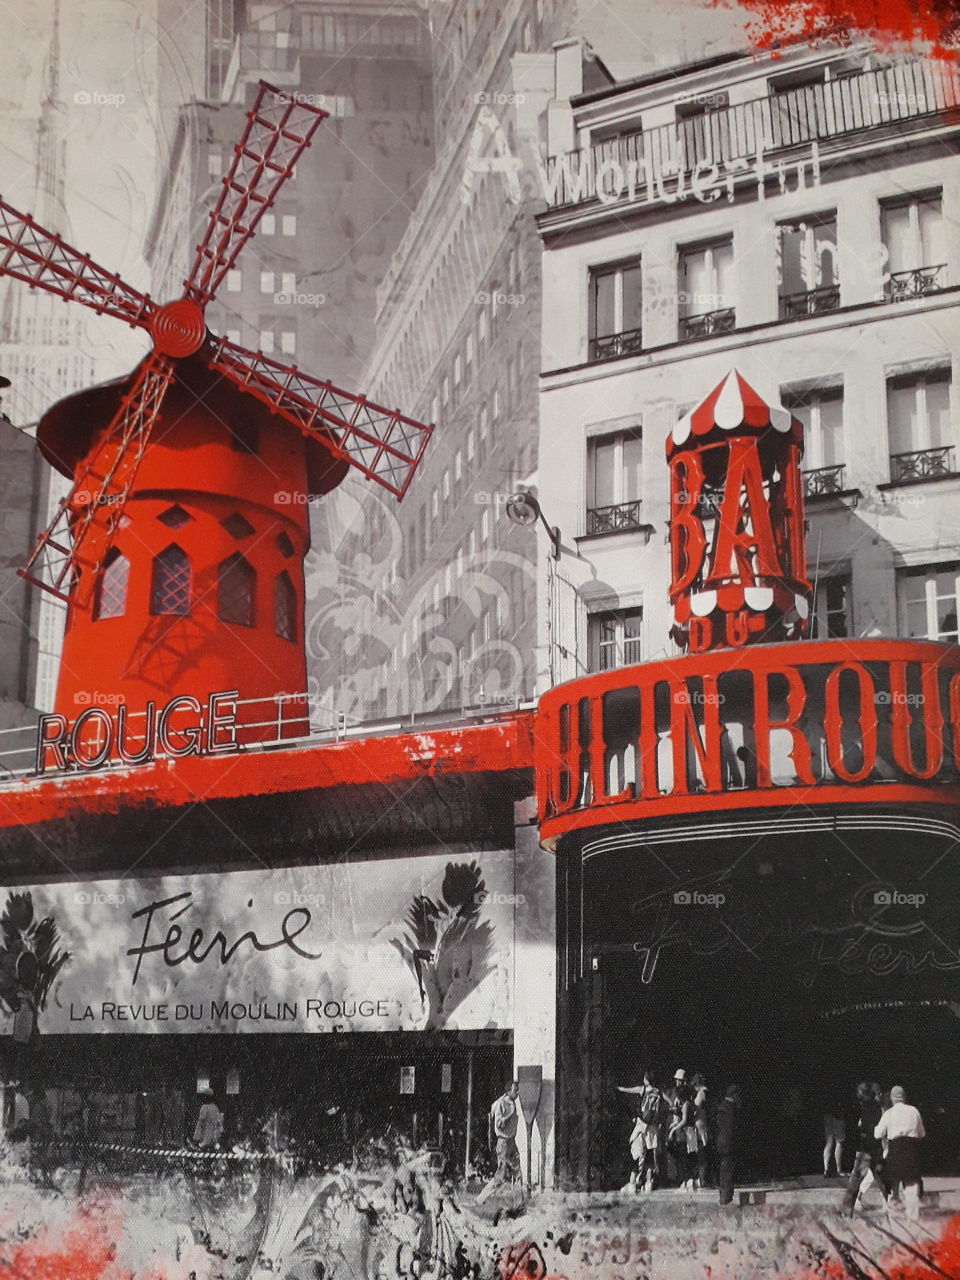 Moulin rouge ~ French destination